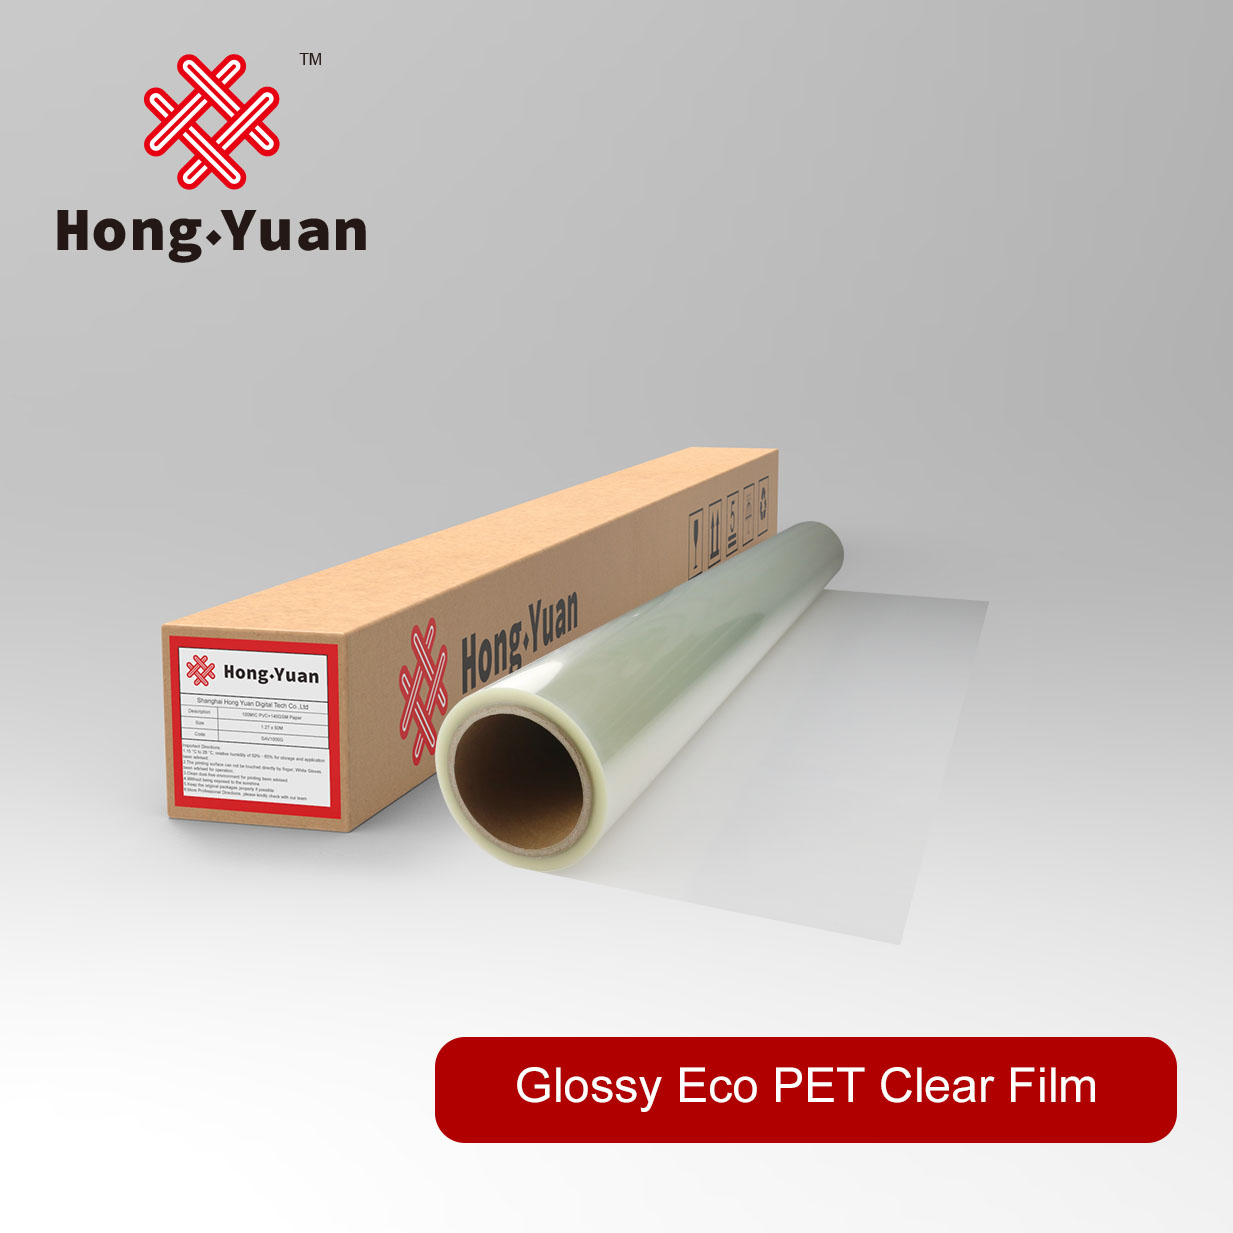 Glossy Eco PET Clear Film ETF100T